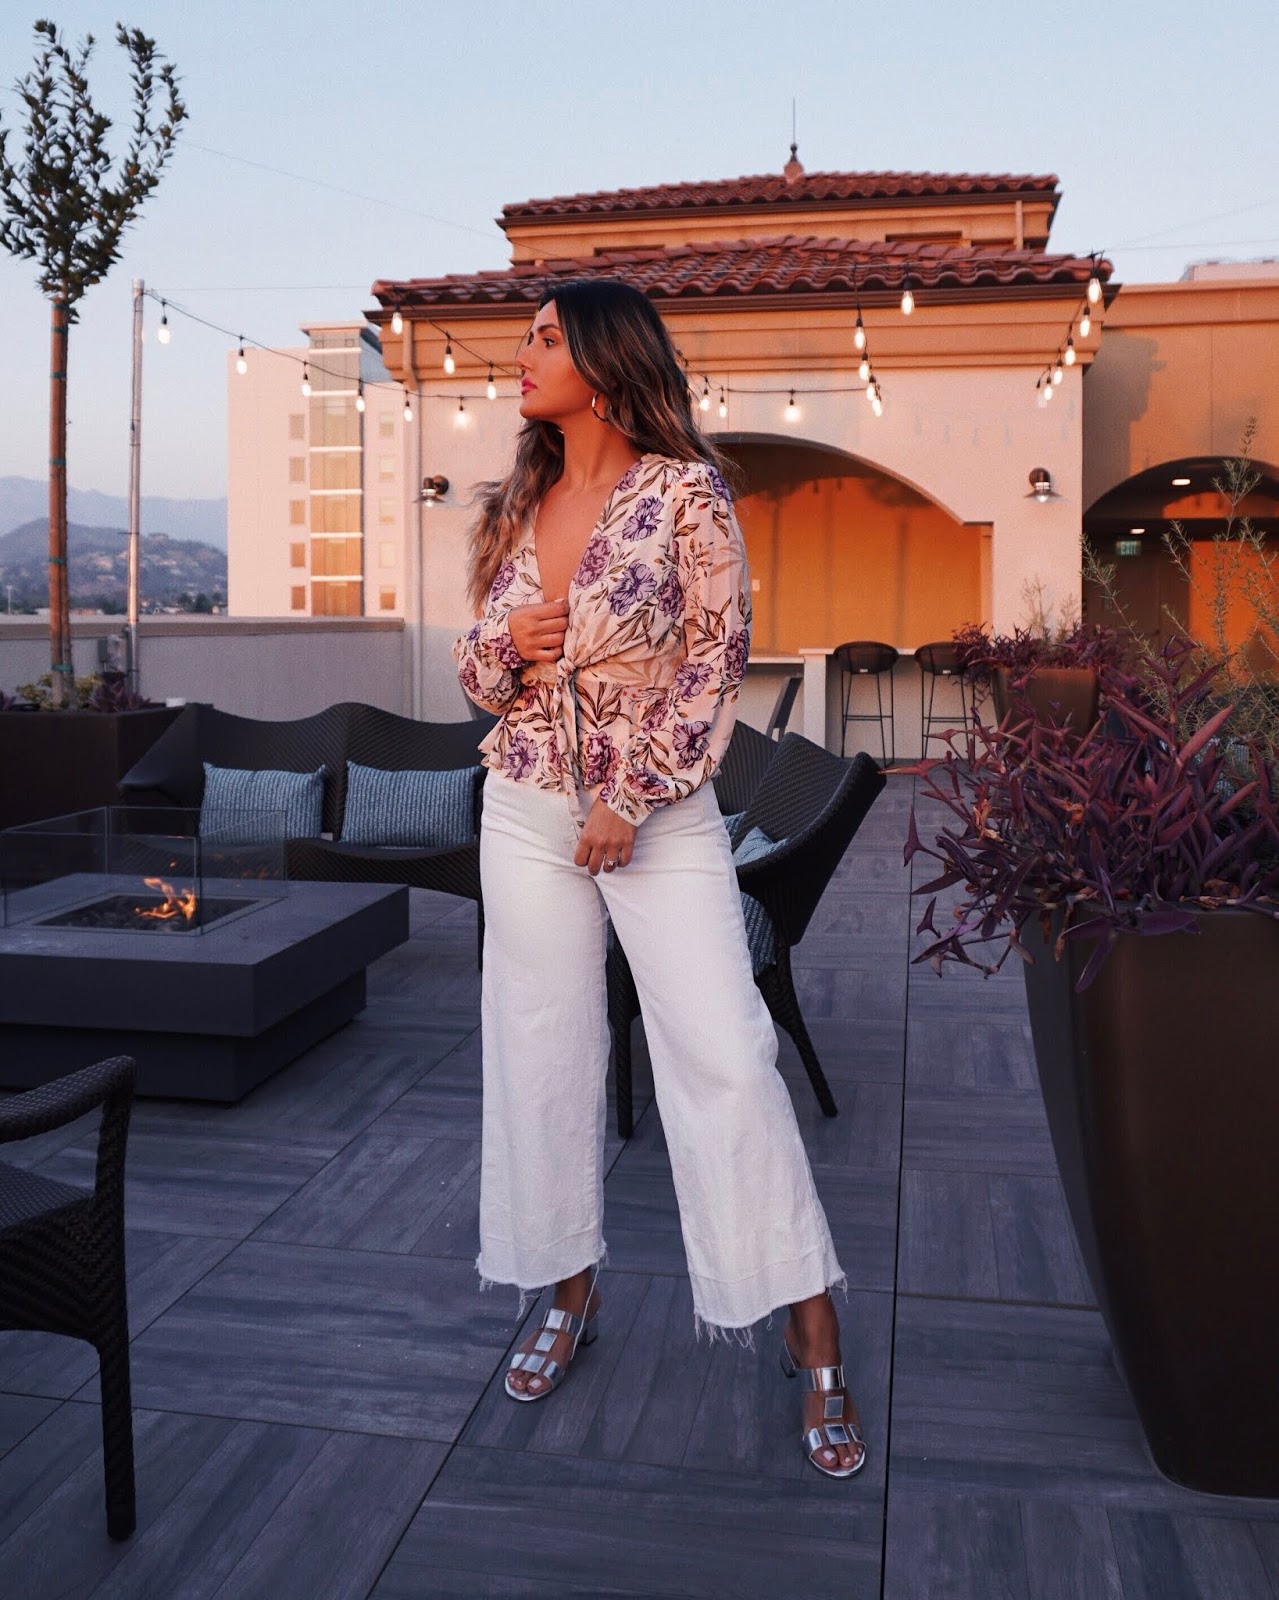 florals for fall, fall florals 2018, fall fashion, how to style florals for fall winter, winter florals, Parmida Kiani, Los Angeles blogger, astr the label, revolve, shopping guide, how to style, blonde hair, styling florals, ootd, fall fashion, fall outfit,